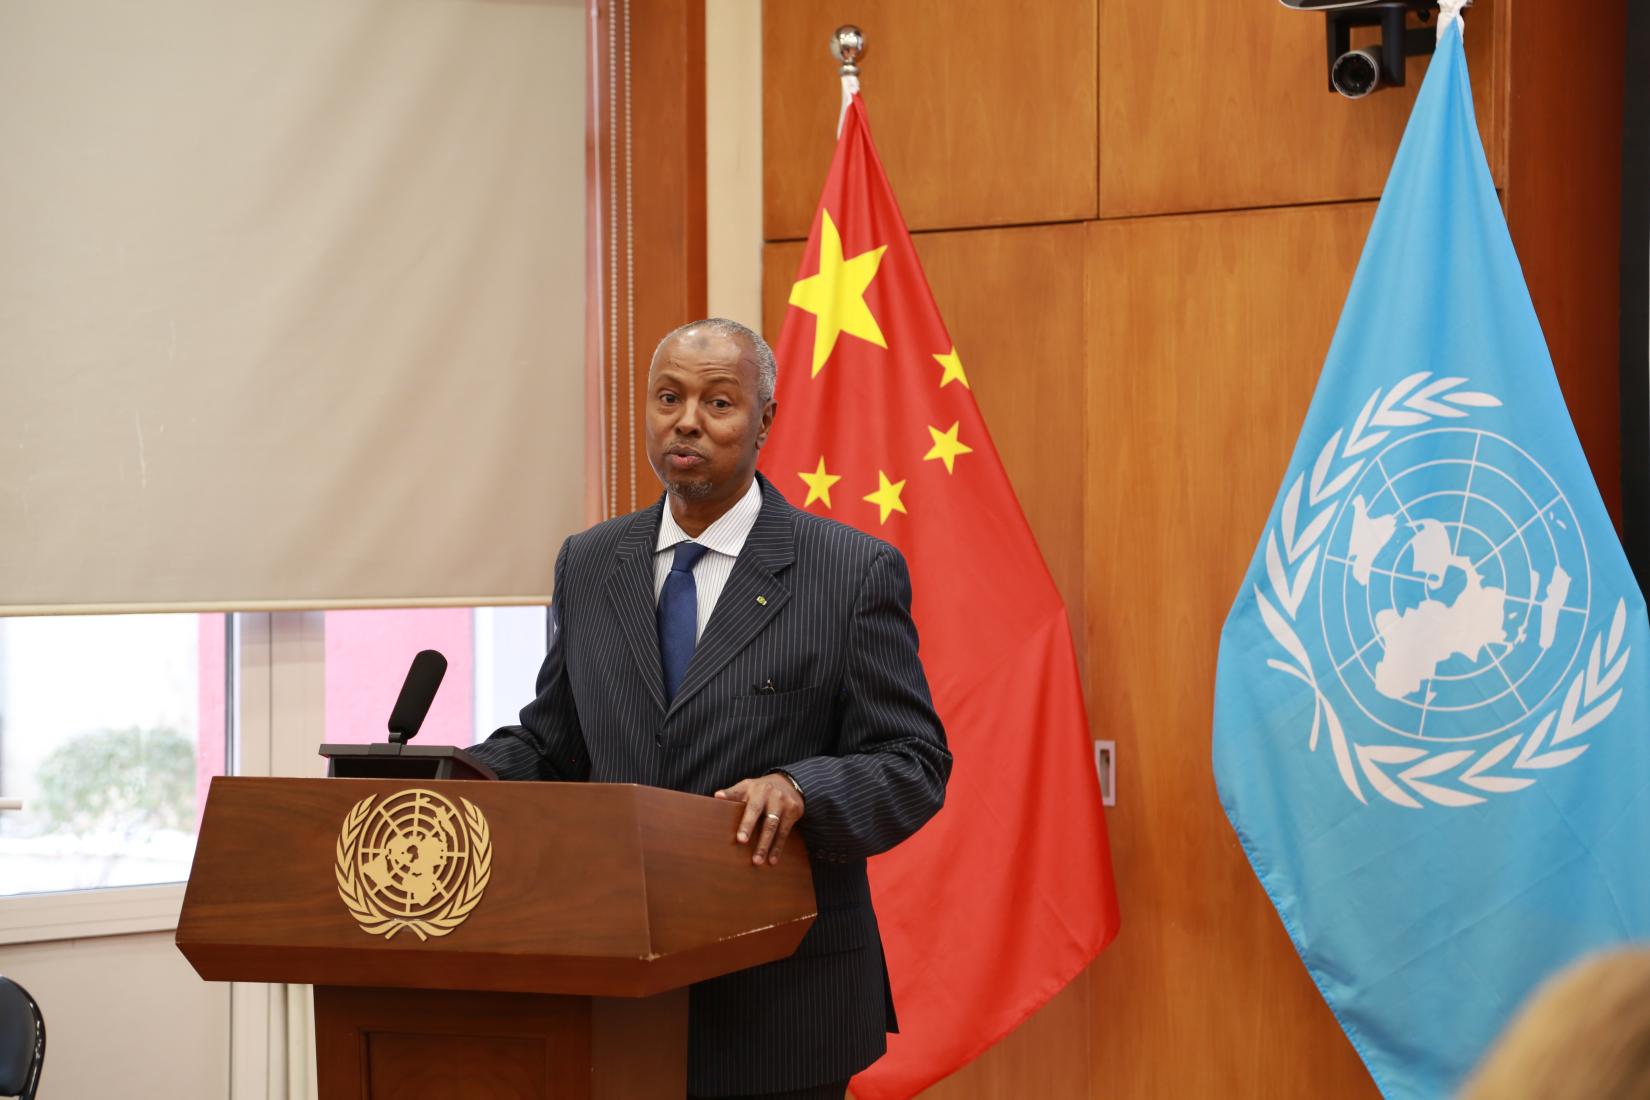 H.E. Mr. Abdallah Abdillahi Miguil, Ambassador of the Republic of Djibouti to the People’s Republic of China, and Acting Dean of the African Ambassadors Group